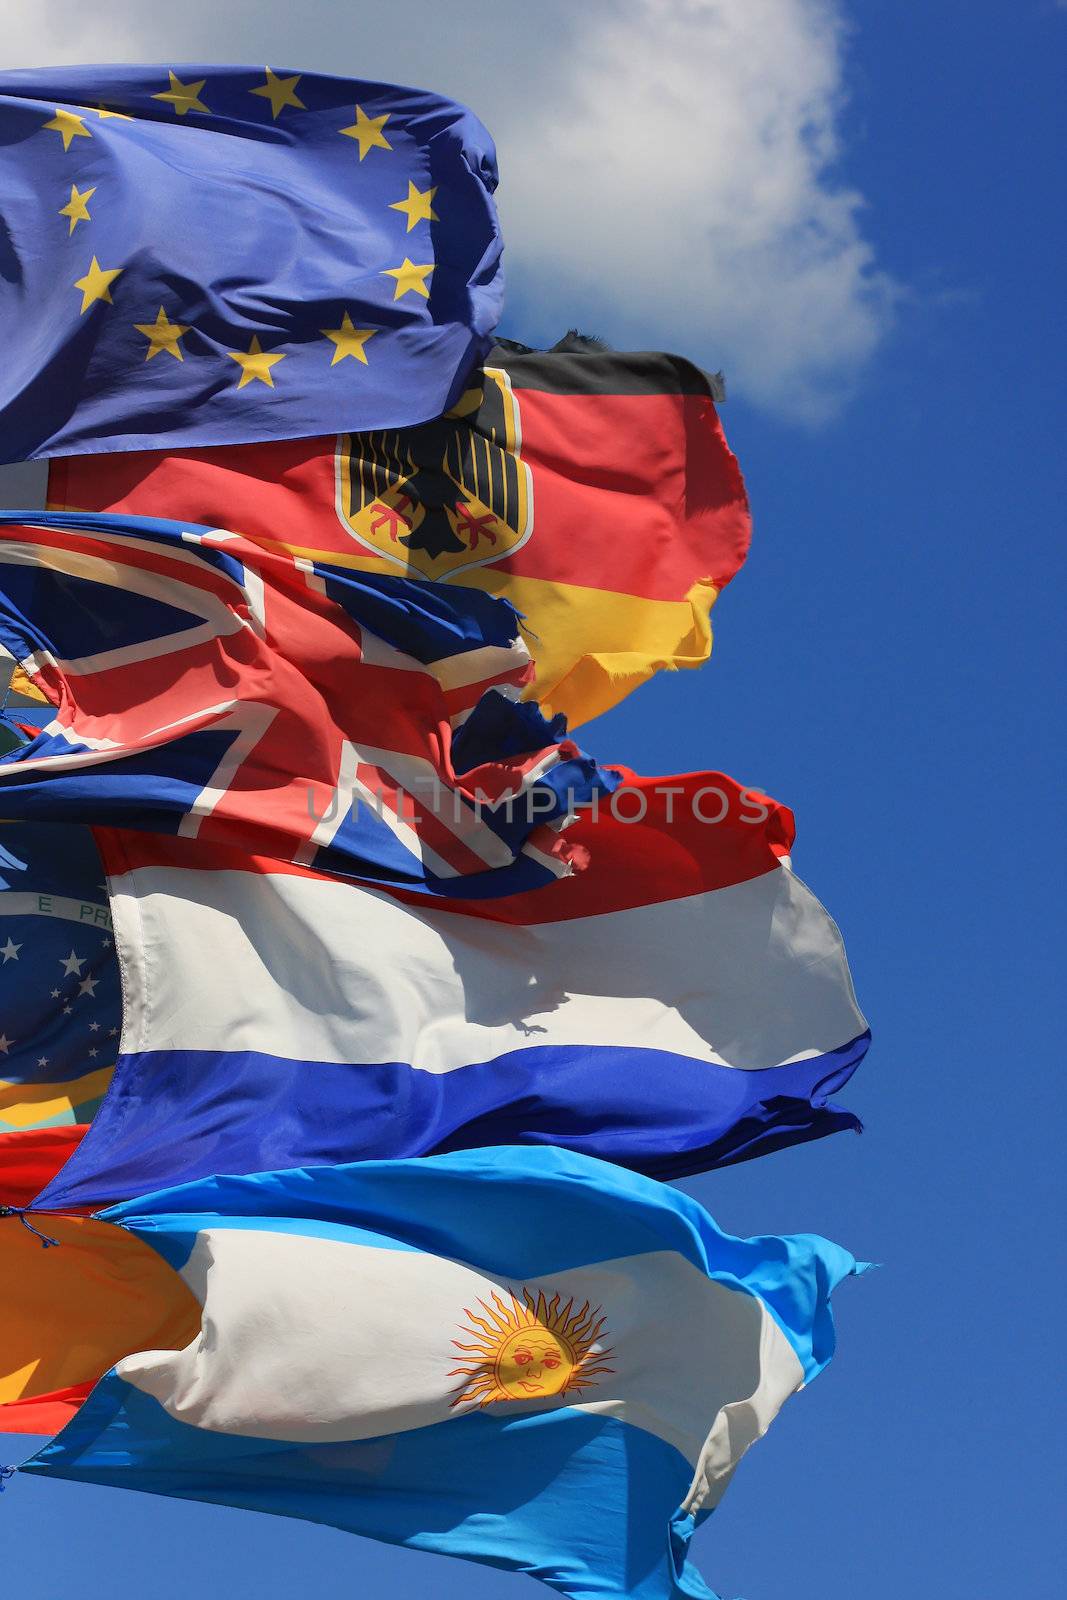 The national flags of France, UK and Germany along with the European Union flag and the Argentinian all flying together